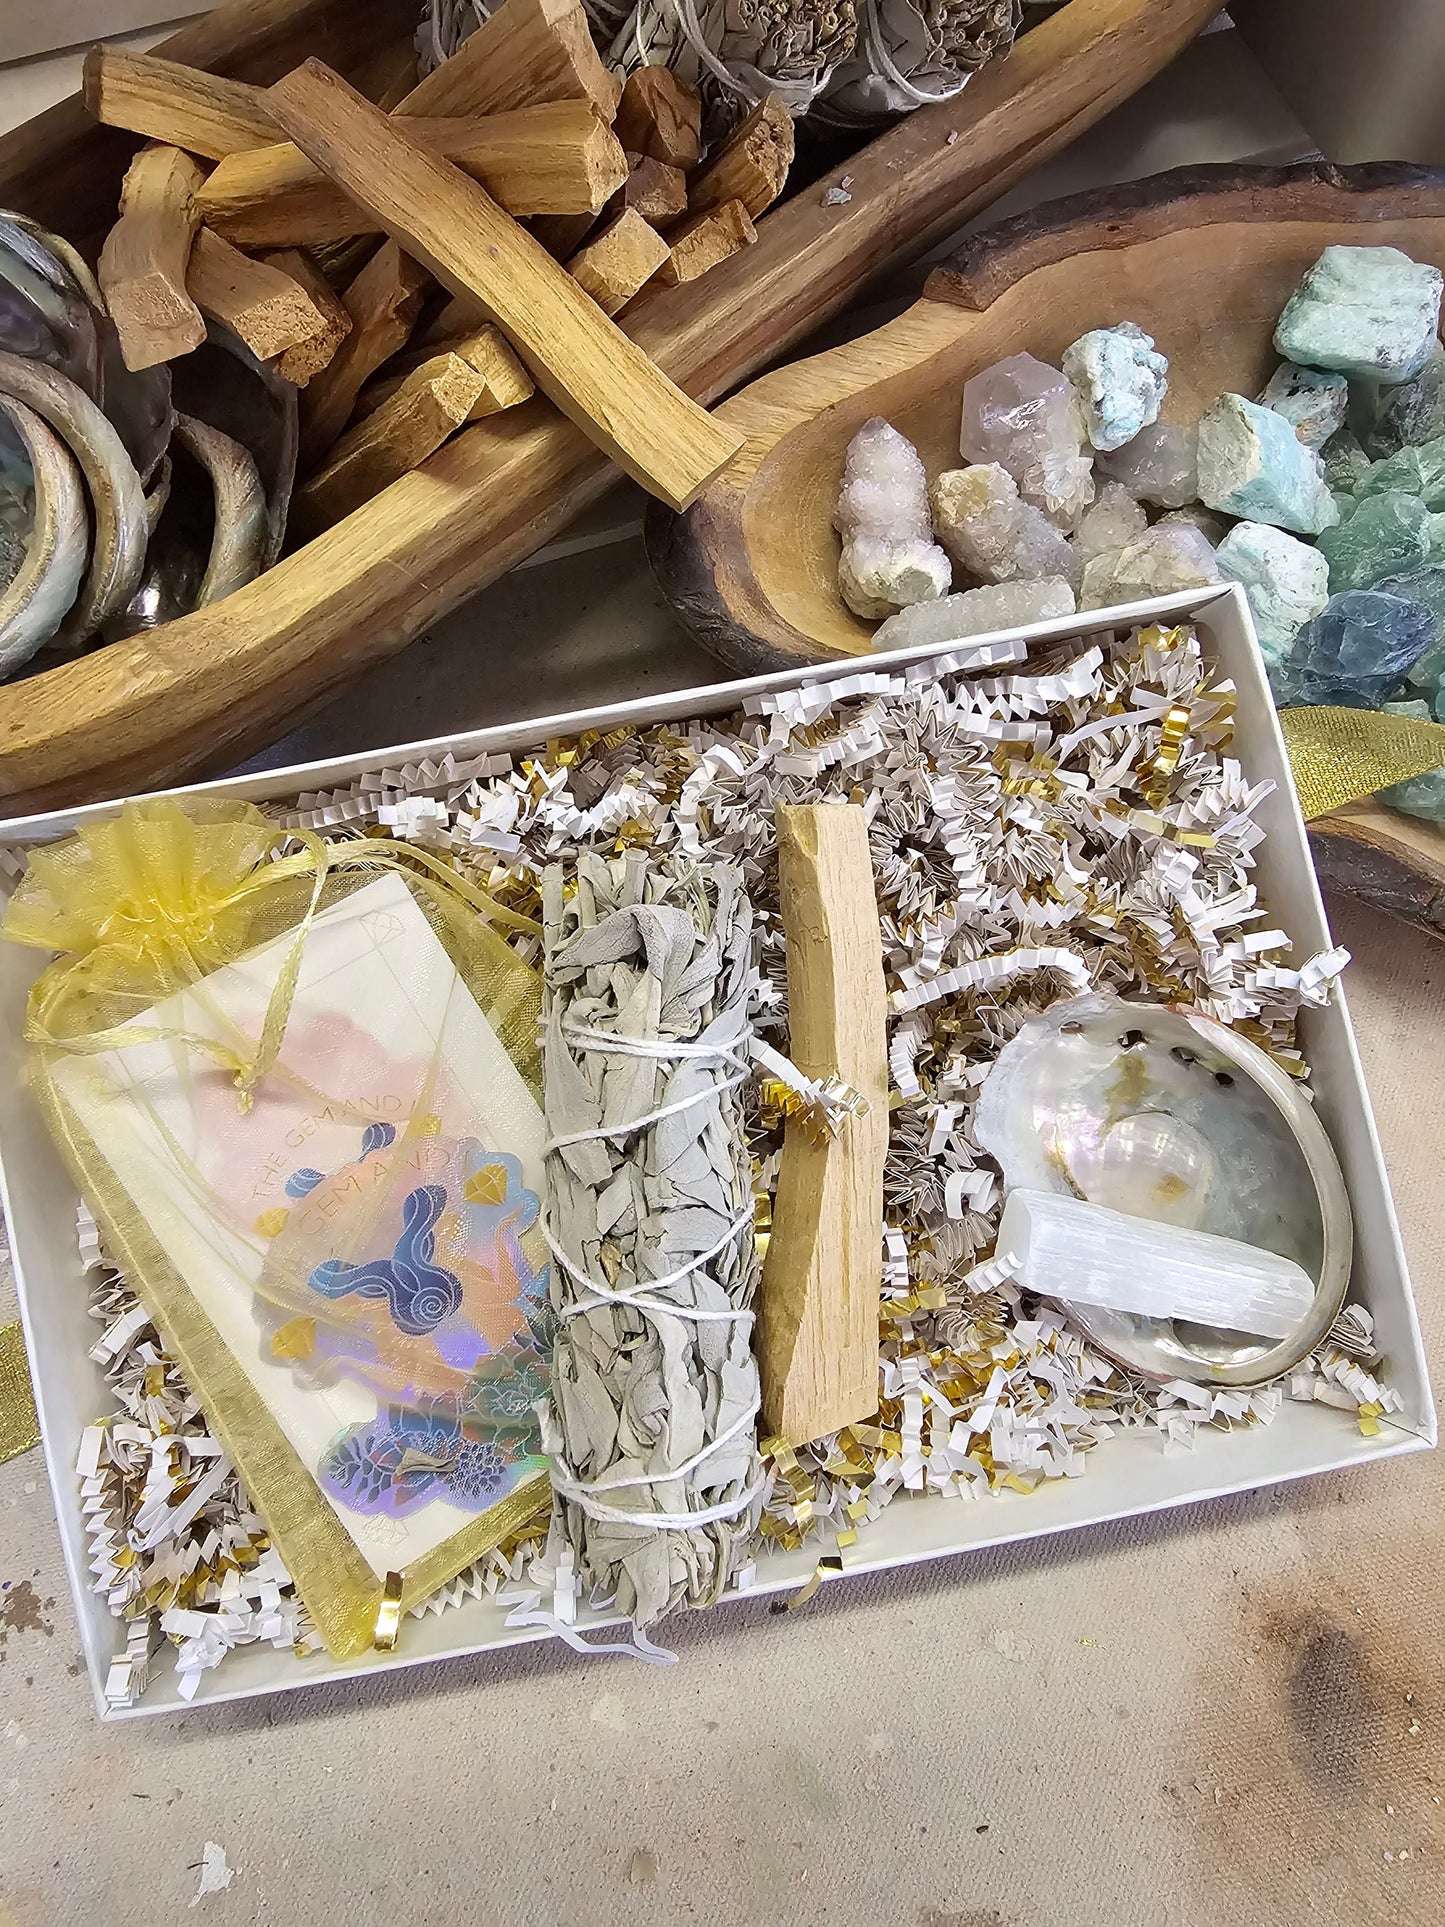 Customizable Healing Smudge Kit Gift Box for Holiday Present with Sage, Palo Santo, Abalone Shell, Selenite, and Crystals